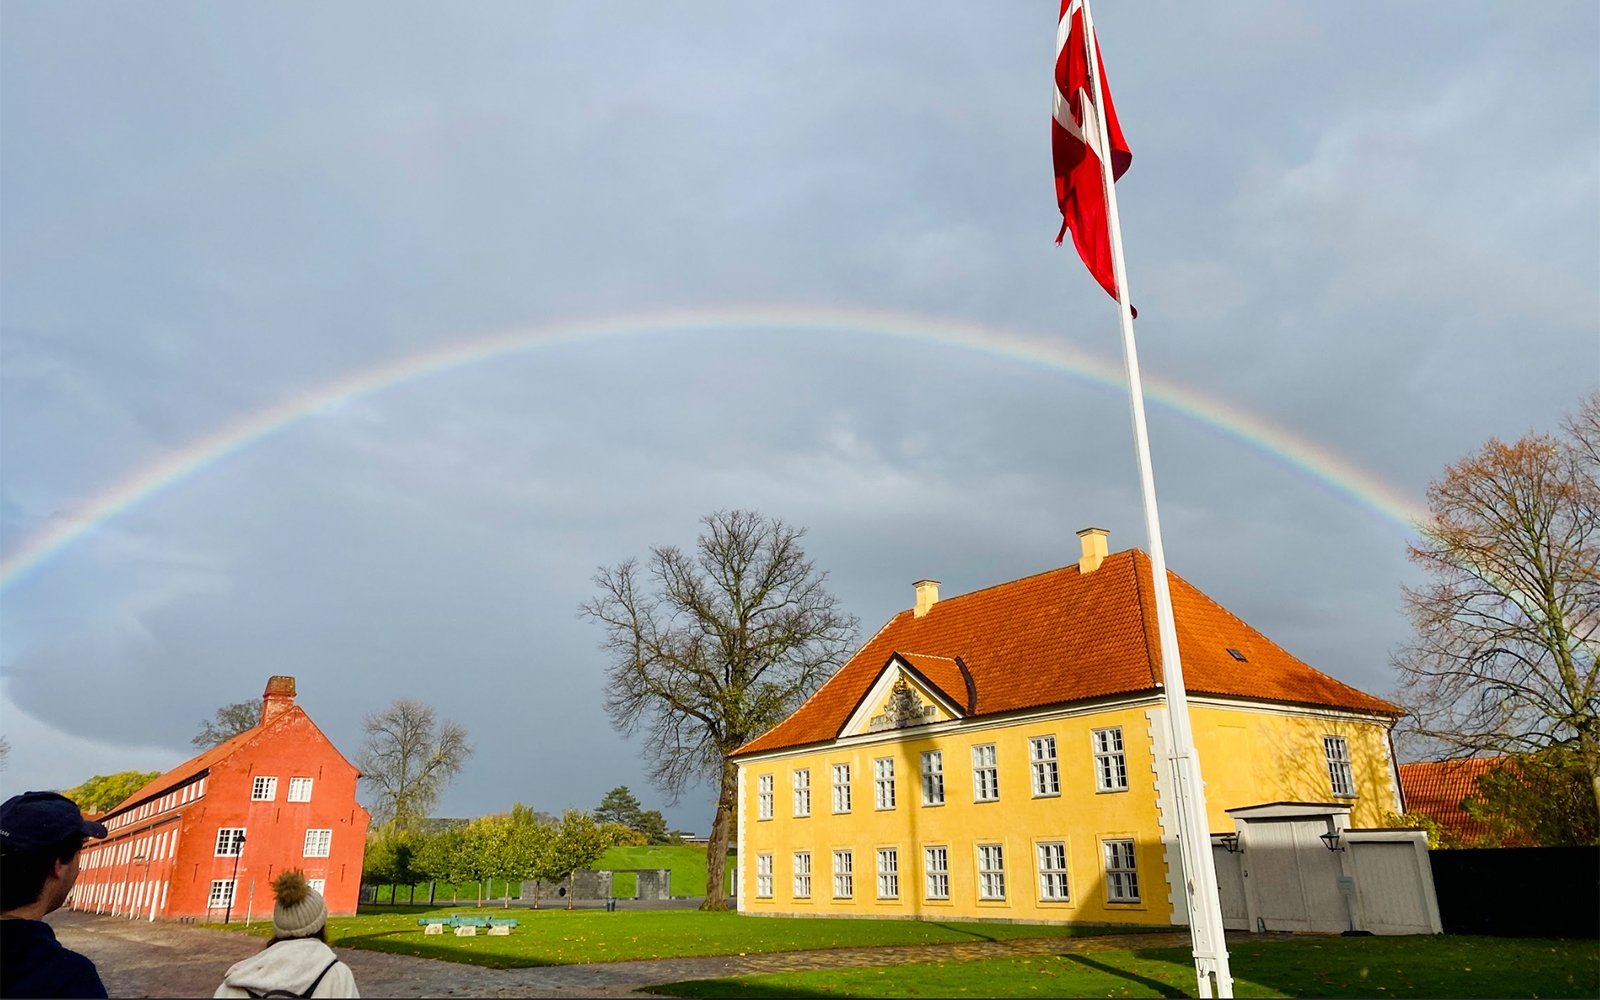 Rainbow over houses with flag in foreground